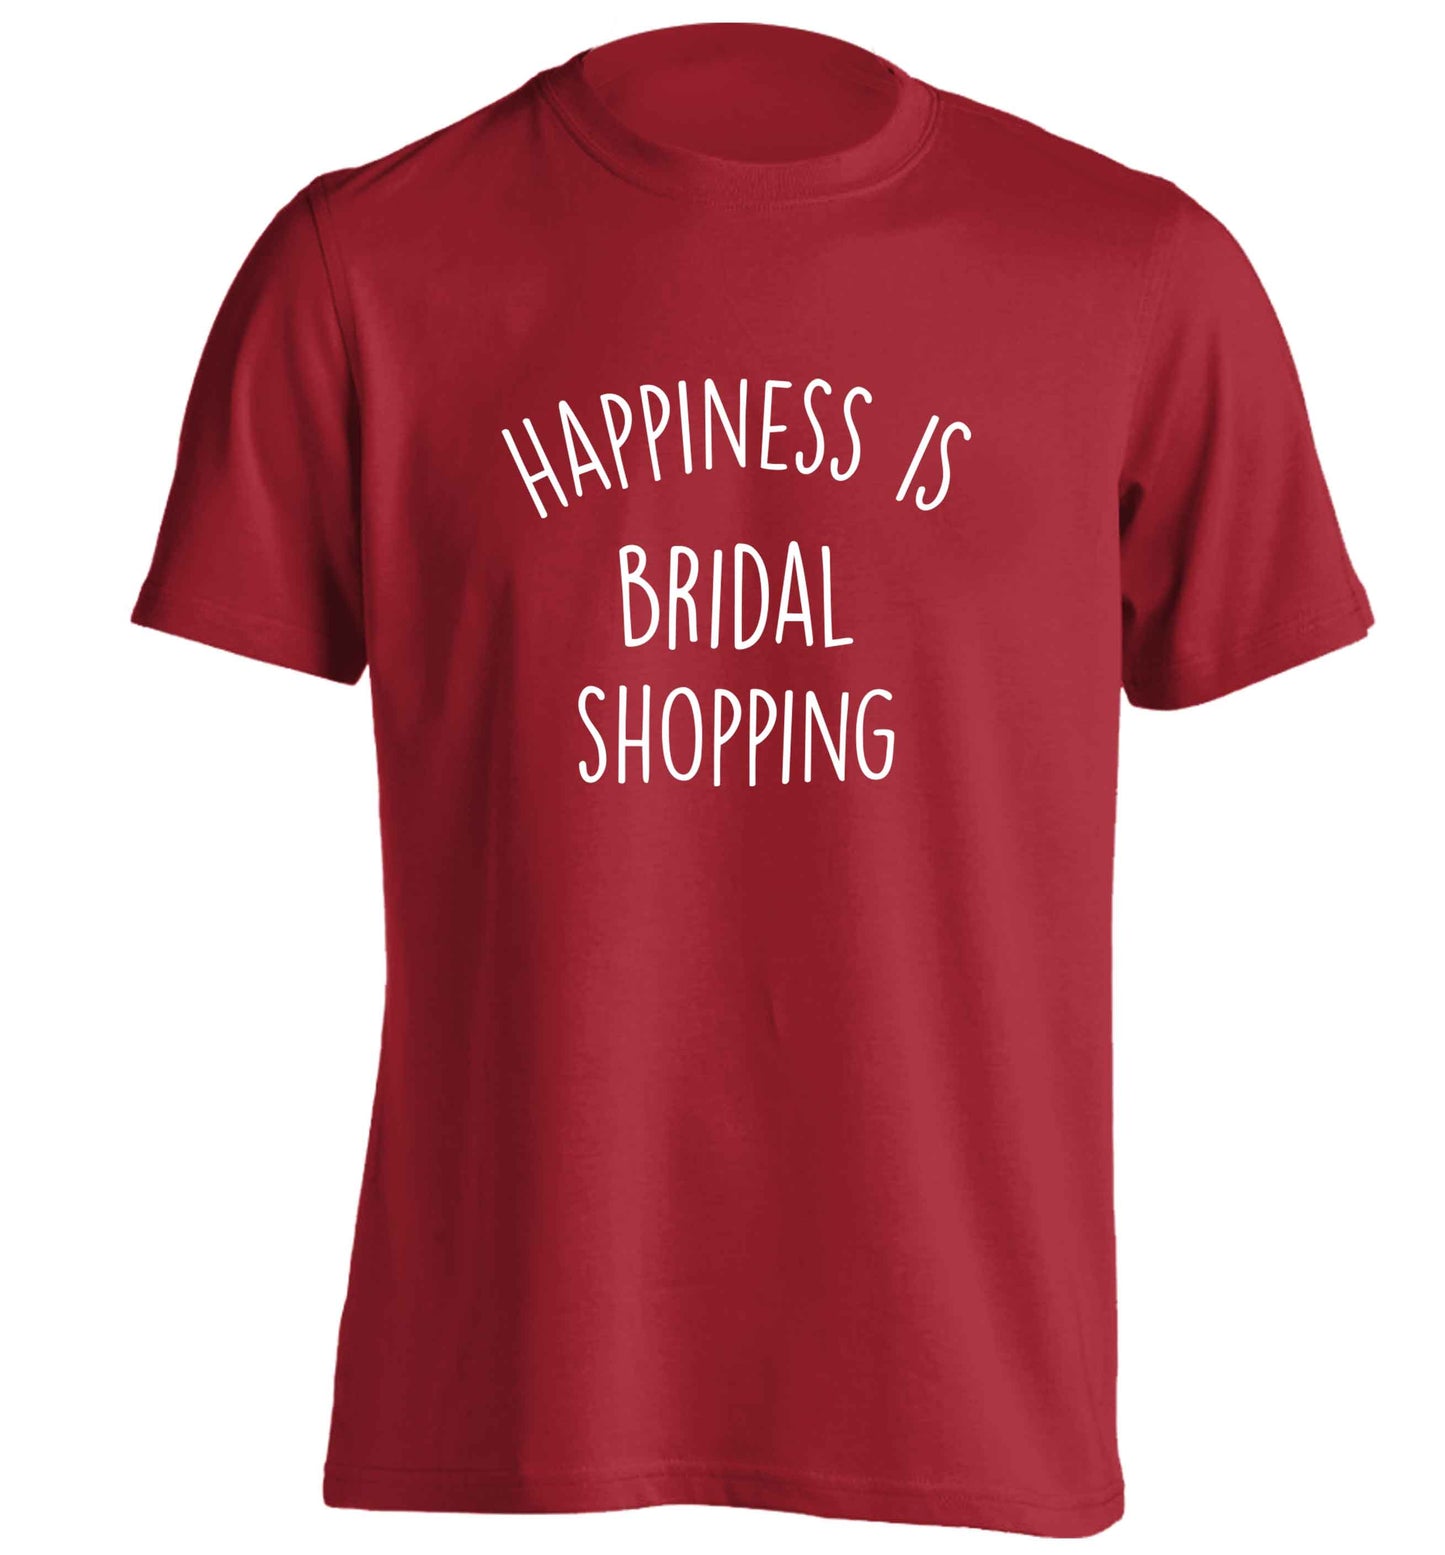 Happiness is bridal shopping adults unisex red Tshirt 2XL